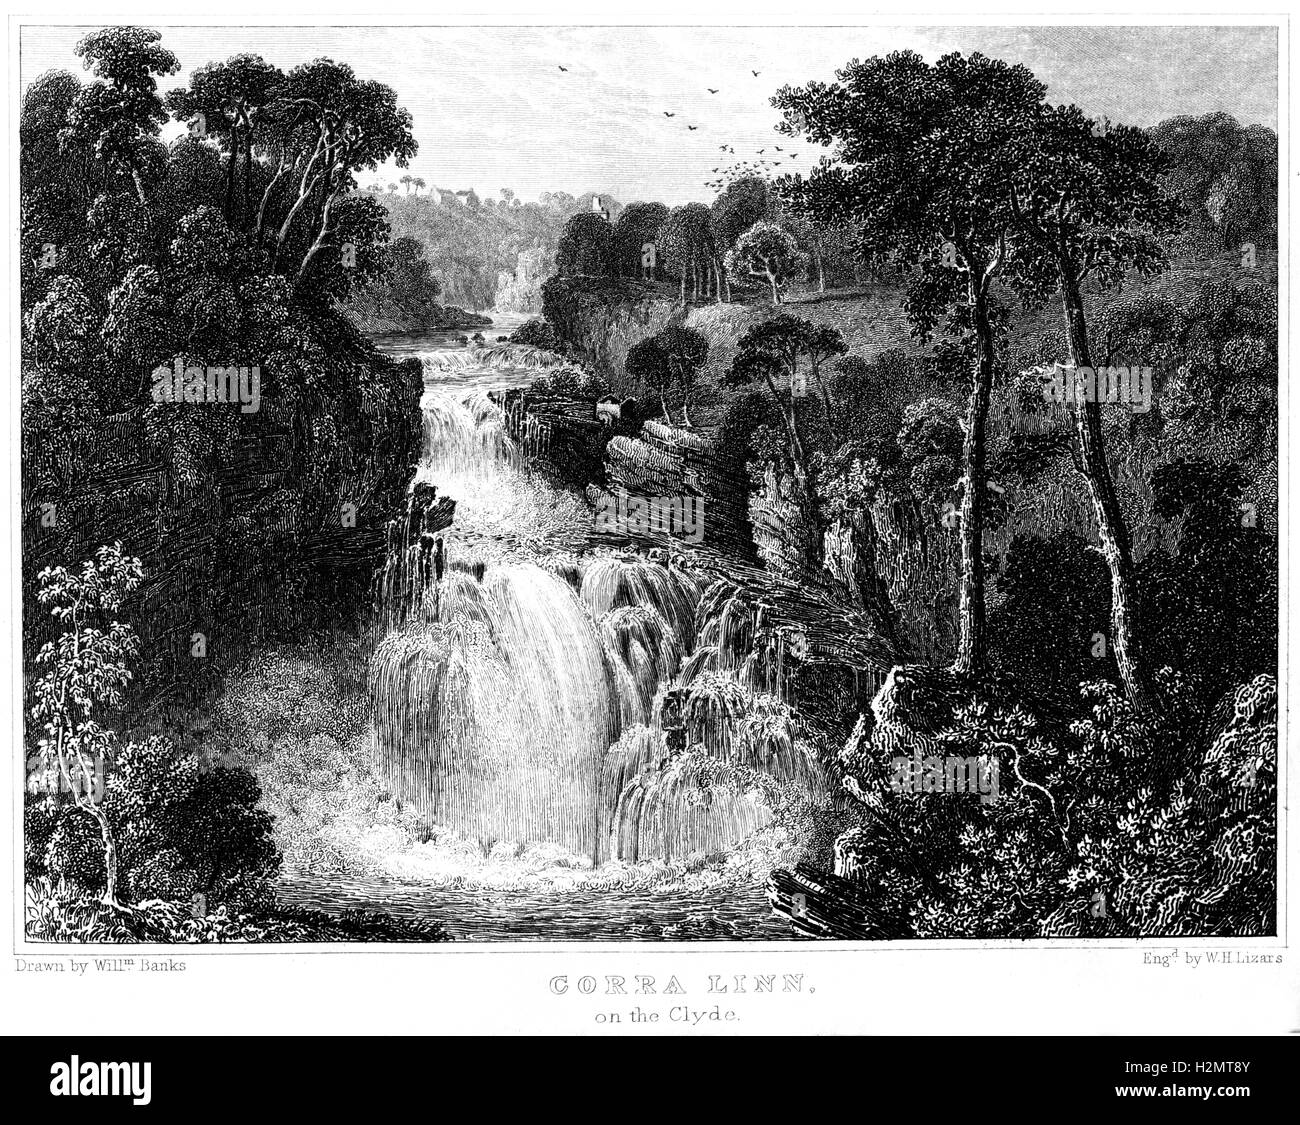 An engraving of Corra Linn (Corra Lynn) on The Clyde scanned at high resolution from a book printed in 1838. Believed copyright free. Stock Photo